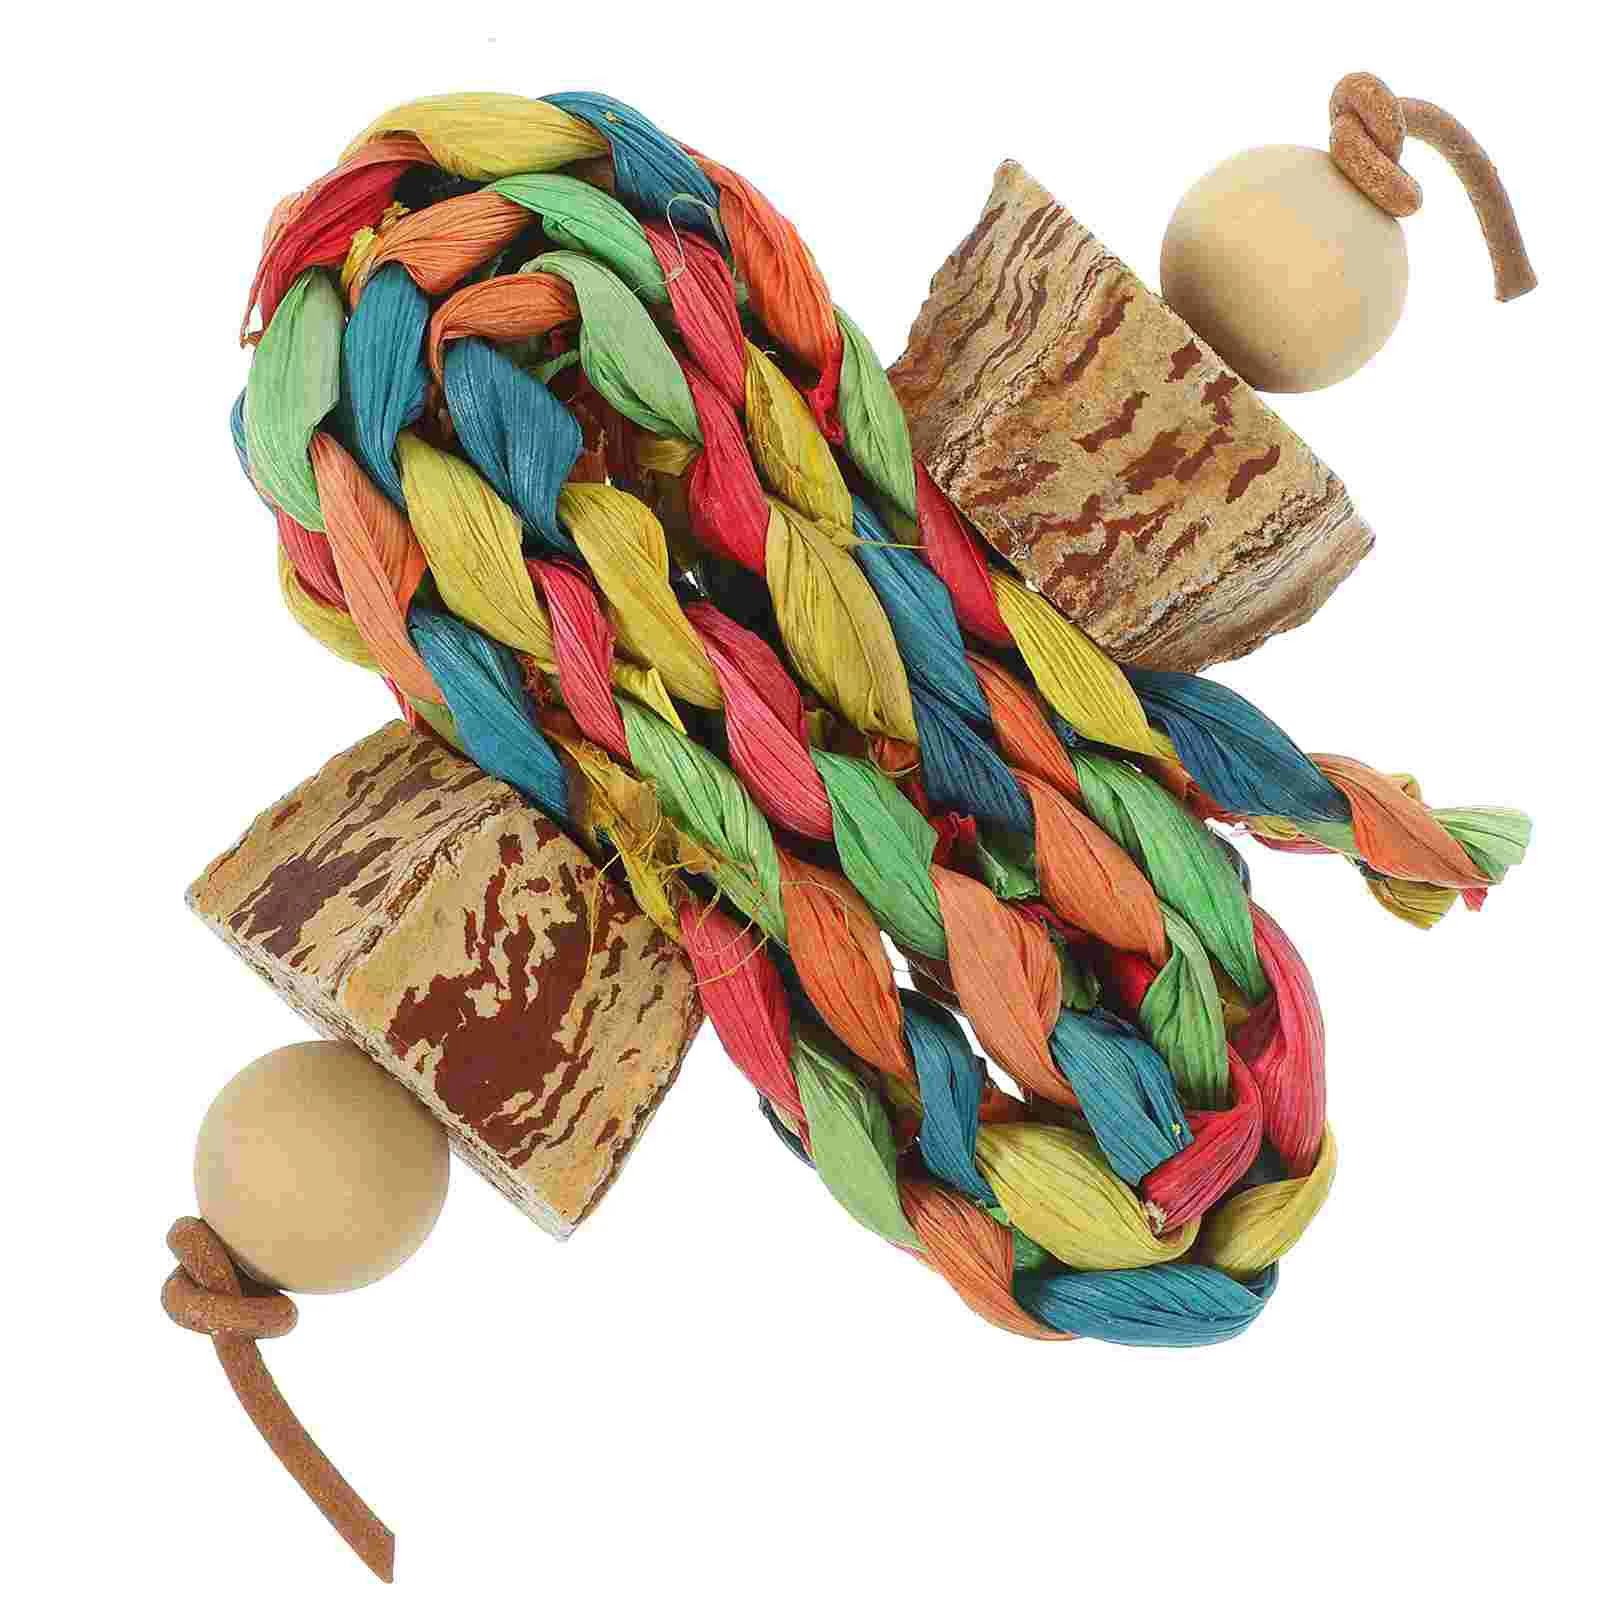 

Toys Bird Toy Parrot Chewing Swing Foraging Parrots Shredder Parakeet Cage Chew Accessories Tearing Wood Hanging Cockatiels Pet